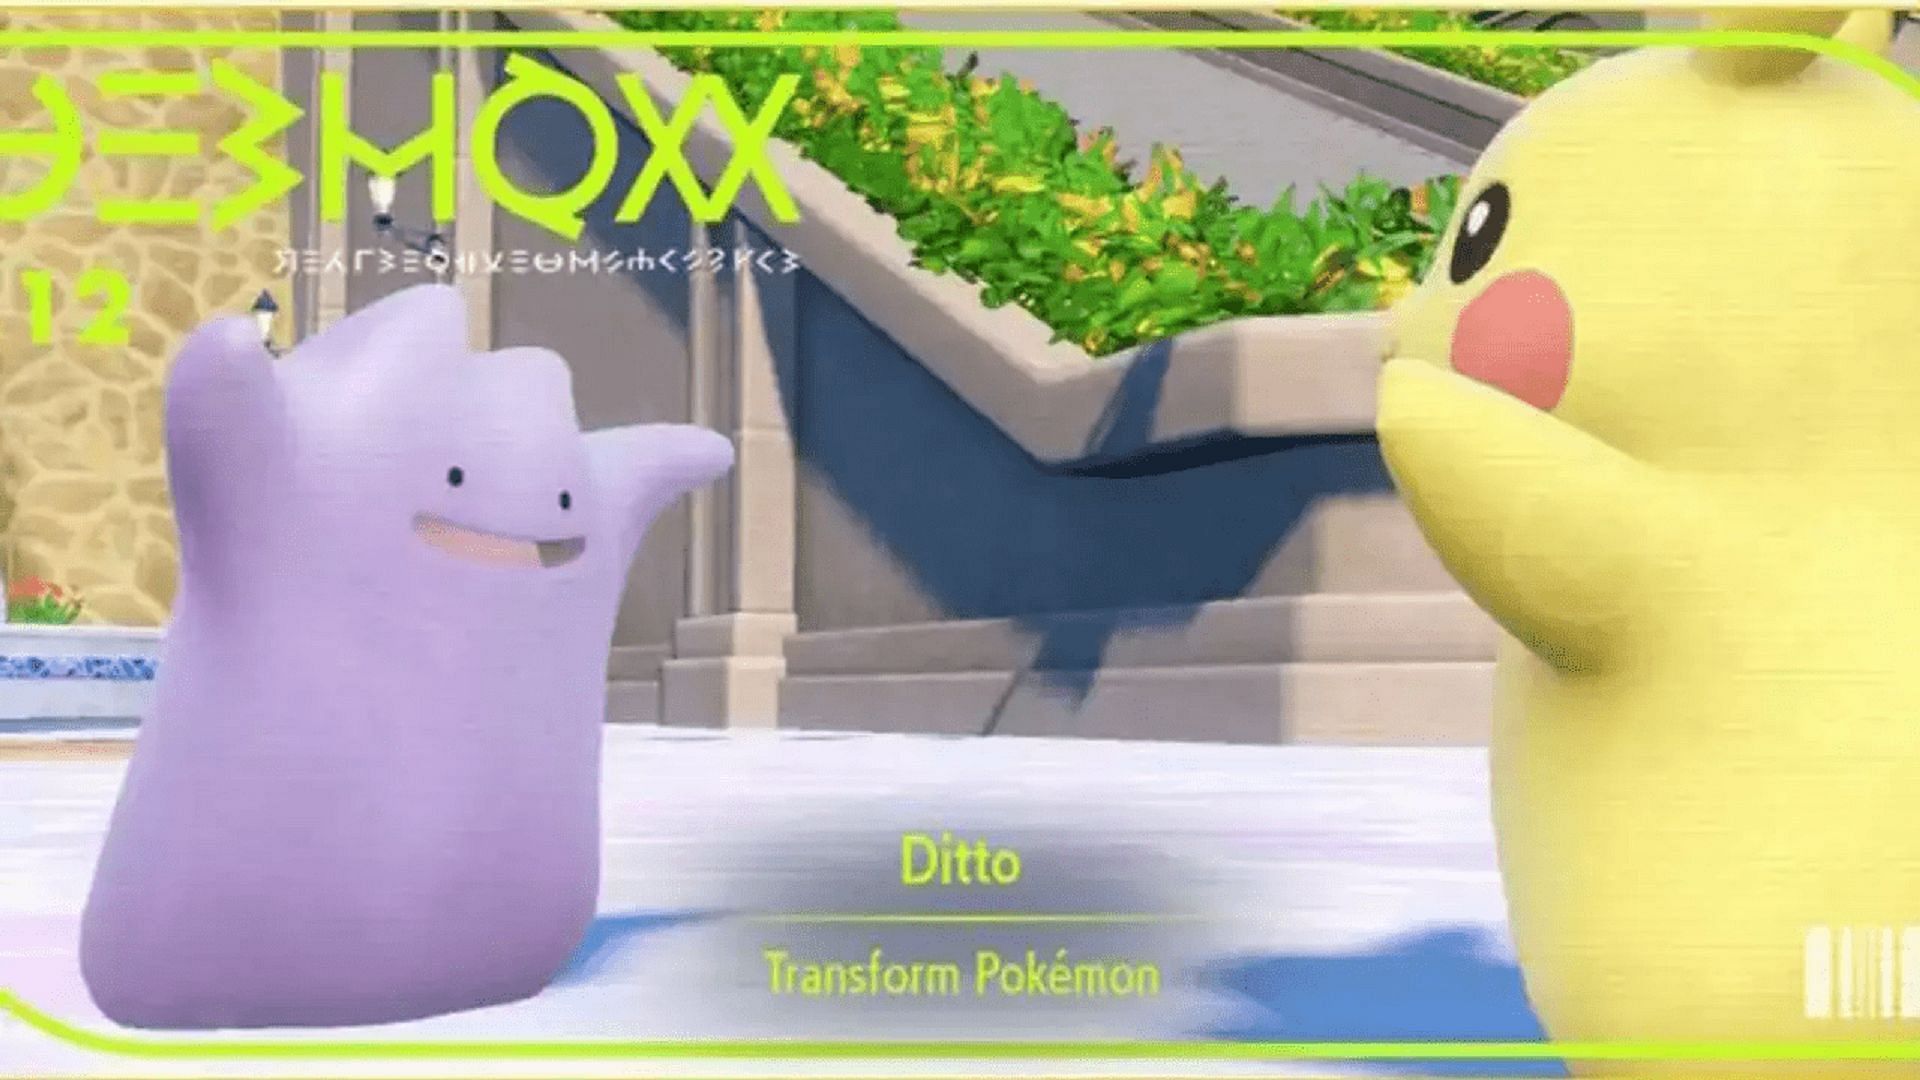 Ditto has the ability to transform into other Pokemon it is facing in battle.